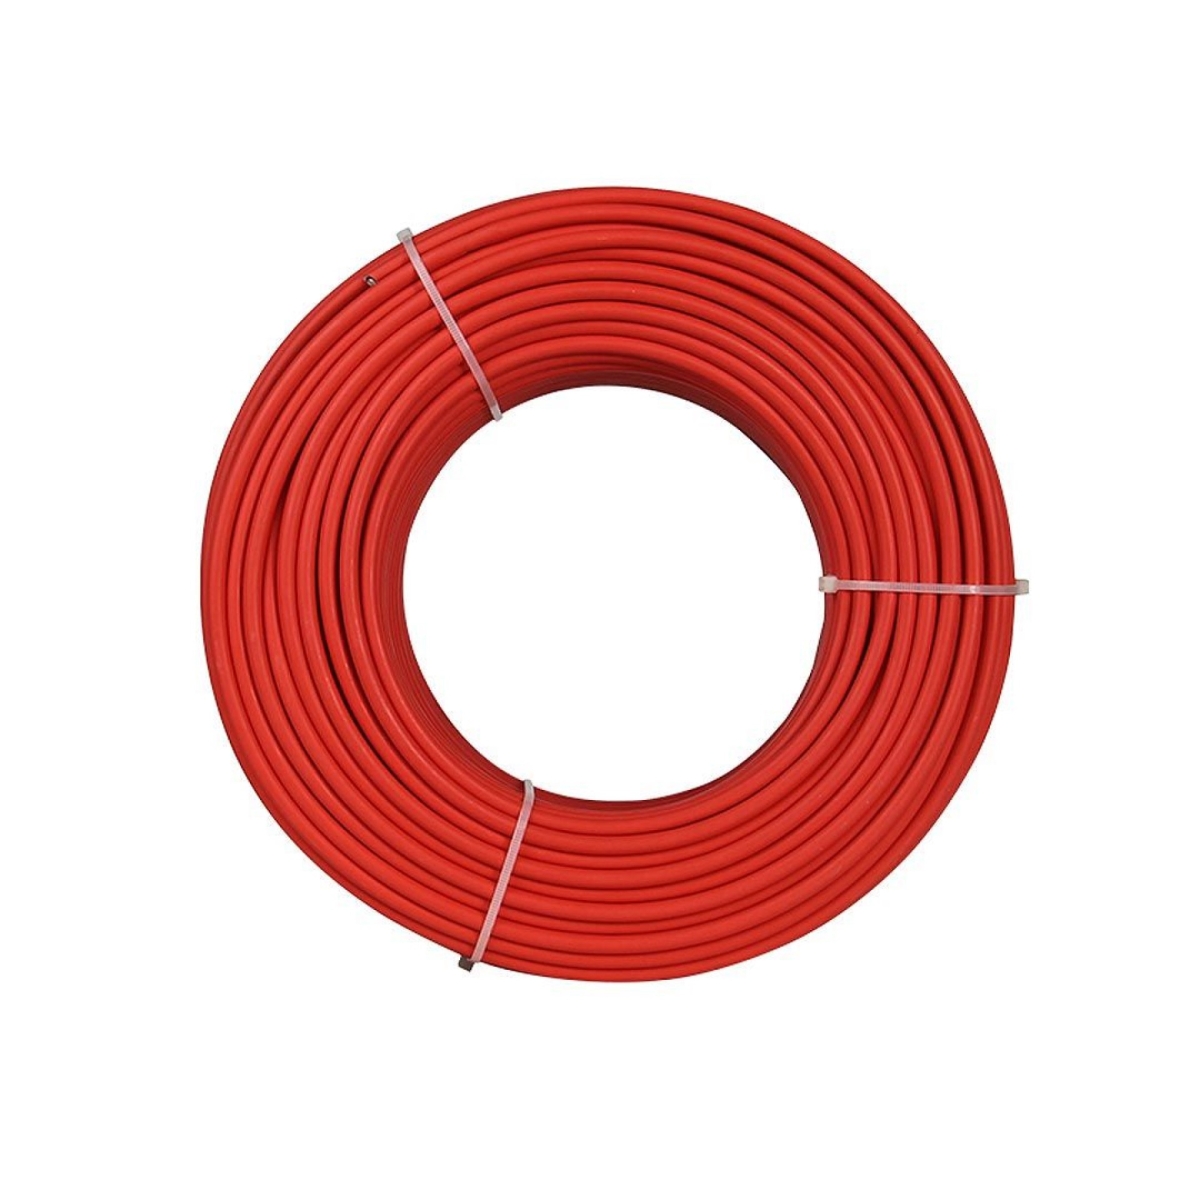 TommaTech 6.0mm Solar Cable PVI1-F Red